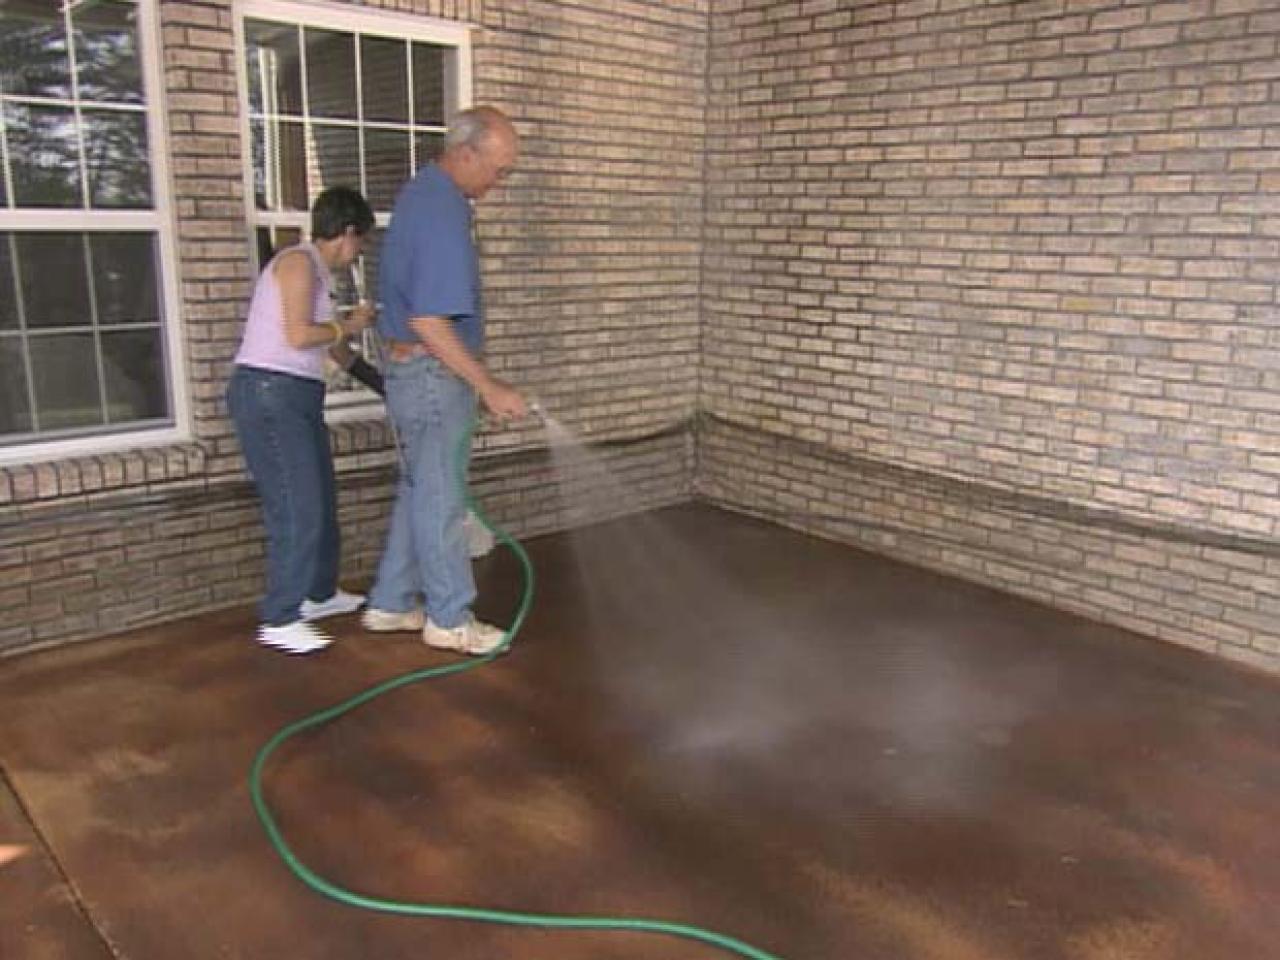 How To Apply Concrete Stain Tos Diy, Can You Stain Your Own Concrete Patio